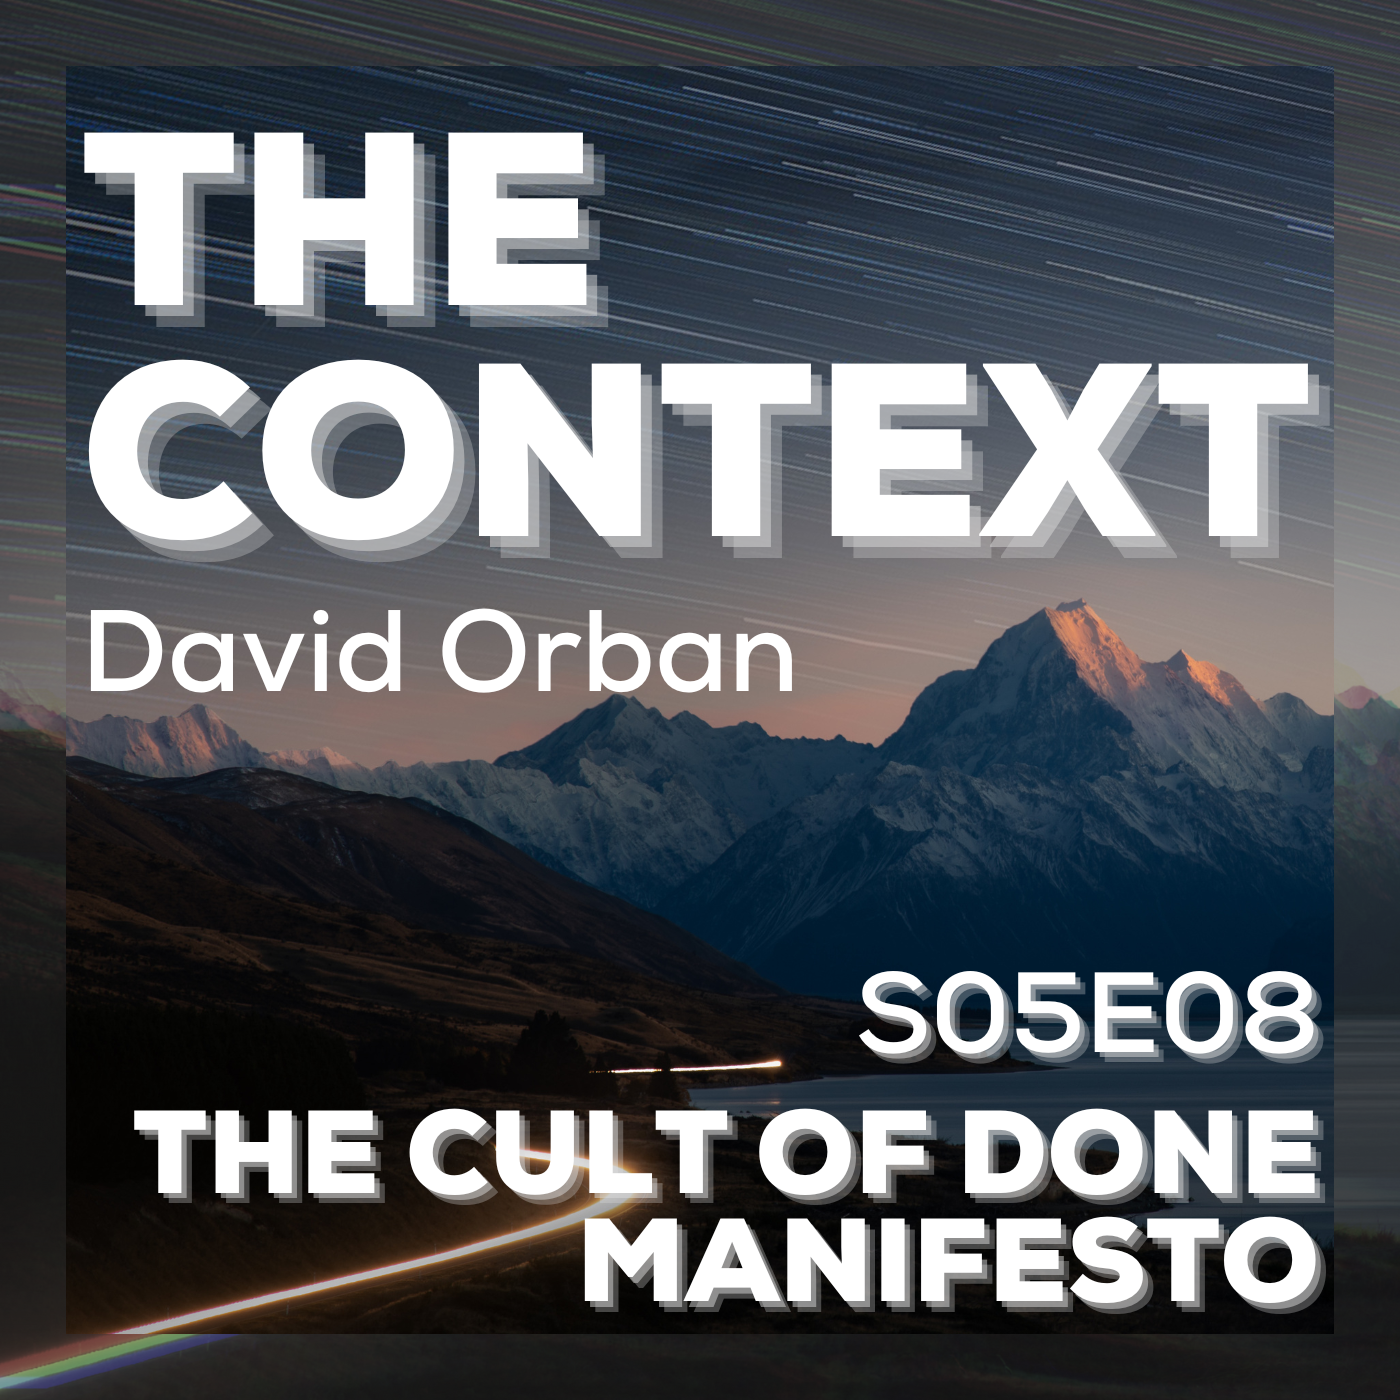 The Cult of Done Manifesto - The Context S05E08